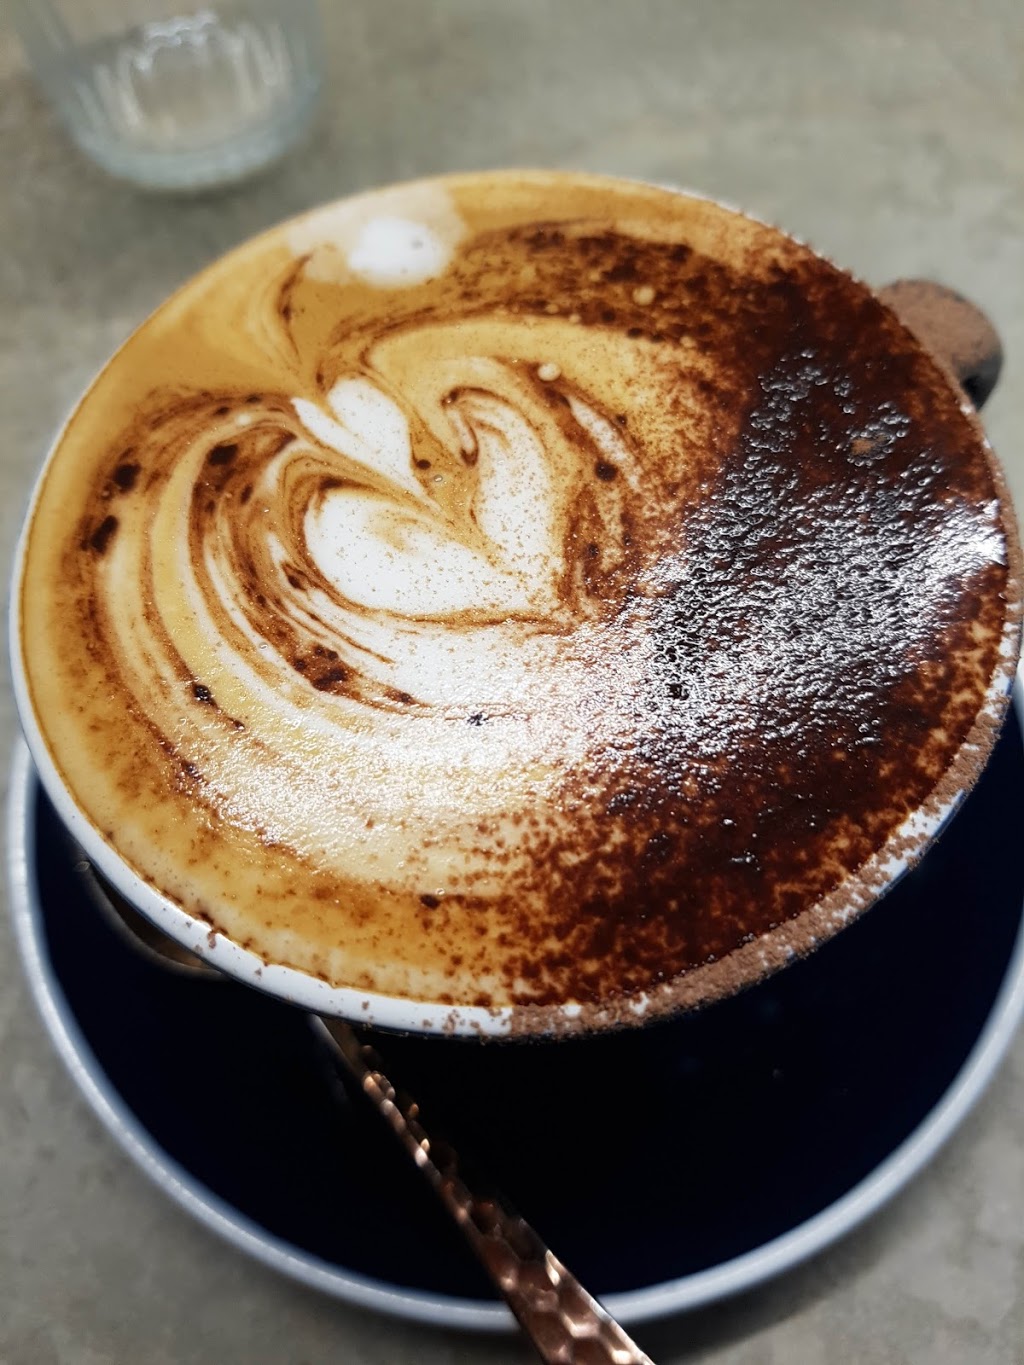 Anthropology Specialty Coffee & Concept Store | cafe | 349 Gaffney St, Pascoe Vale VIC 3044, Australia | 0393543849 OR +61 3 9354 3849